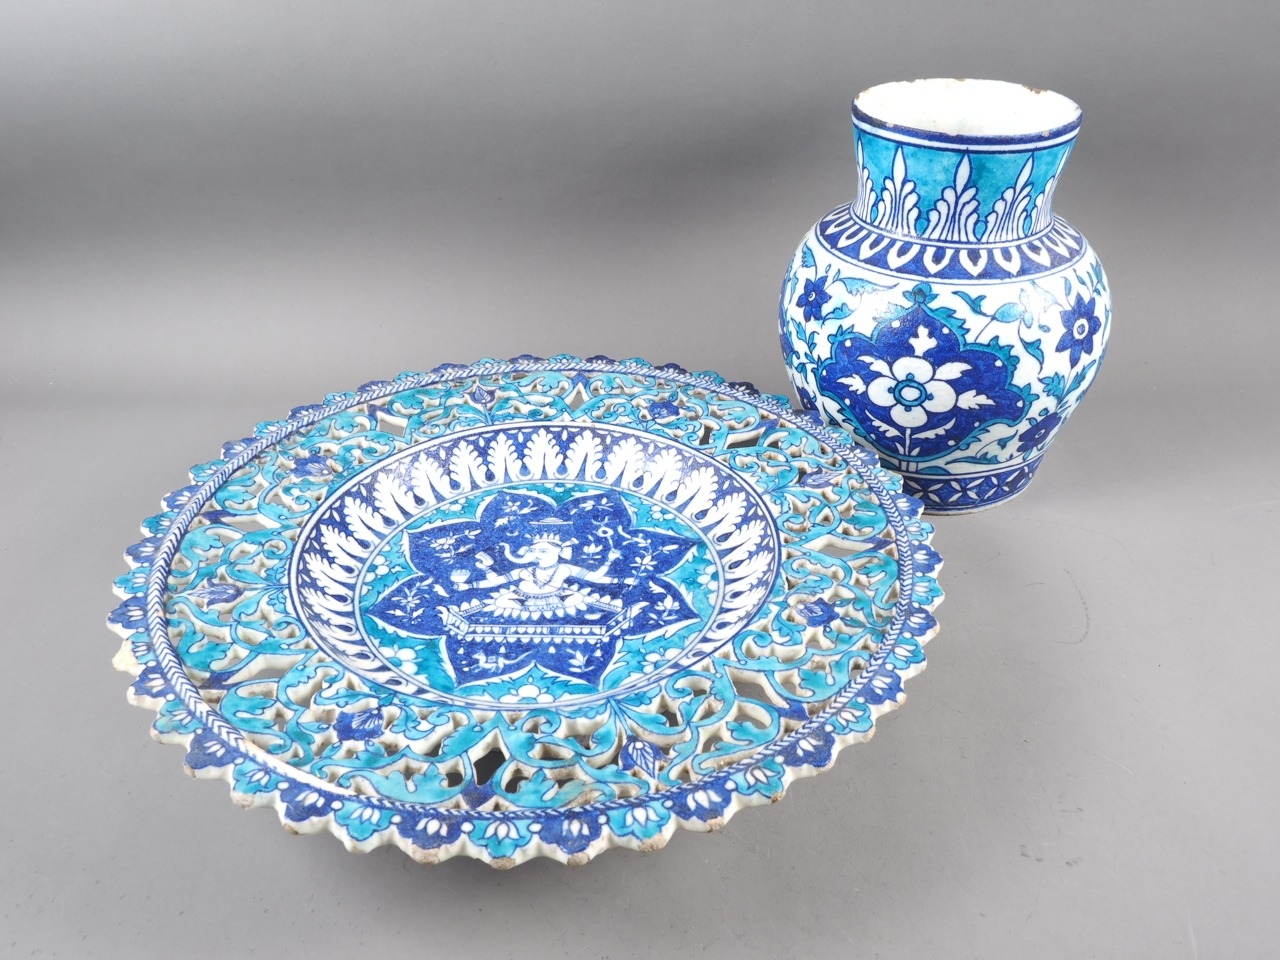 A Persian frit ware vase with all-over floral design in blue and turquoise, 9 1/4" high, and a